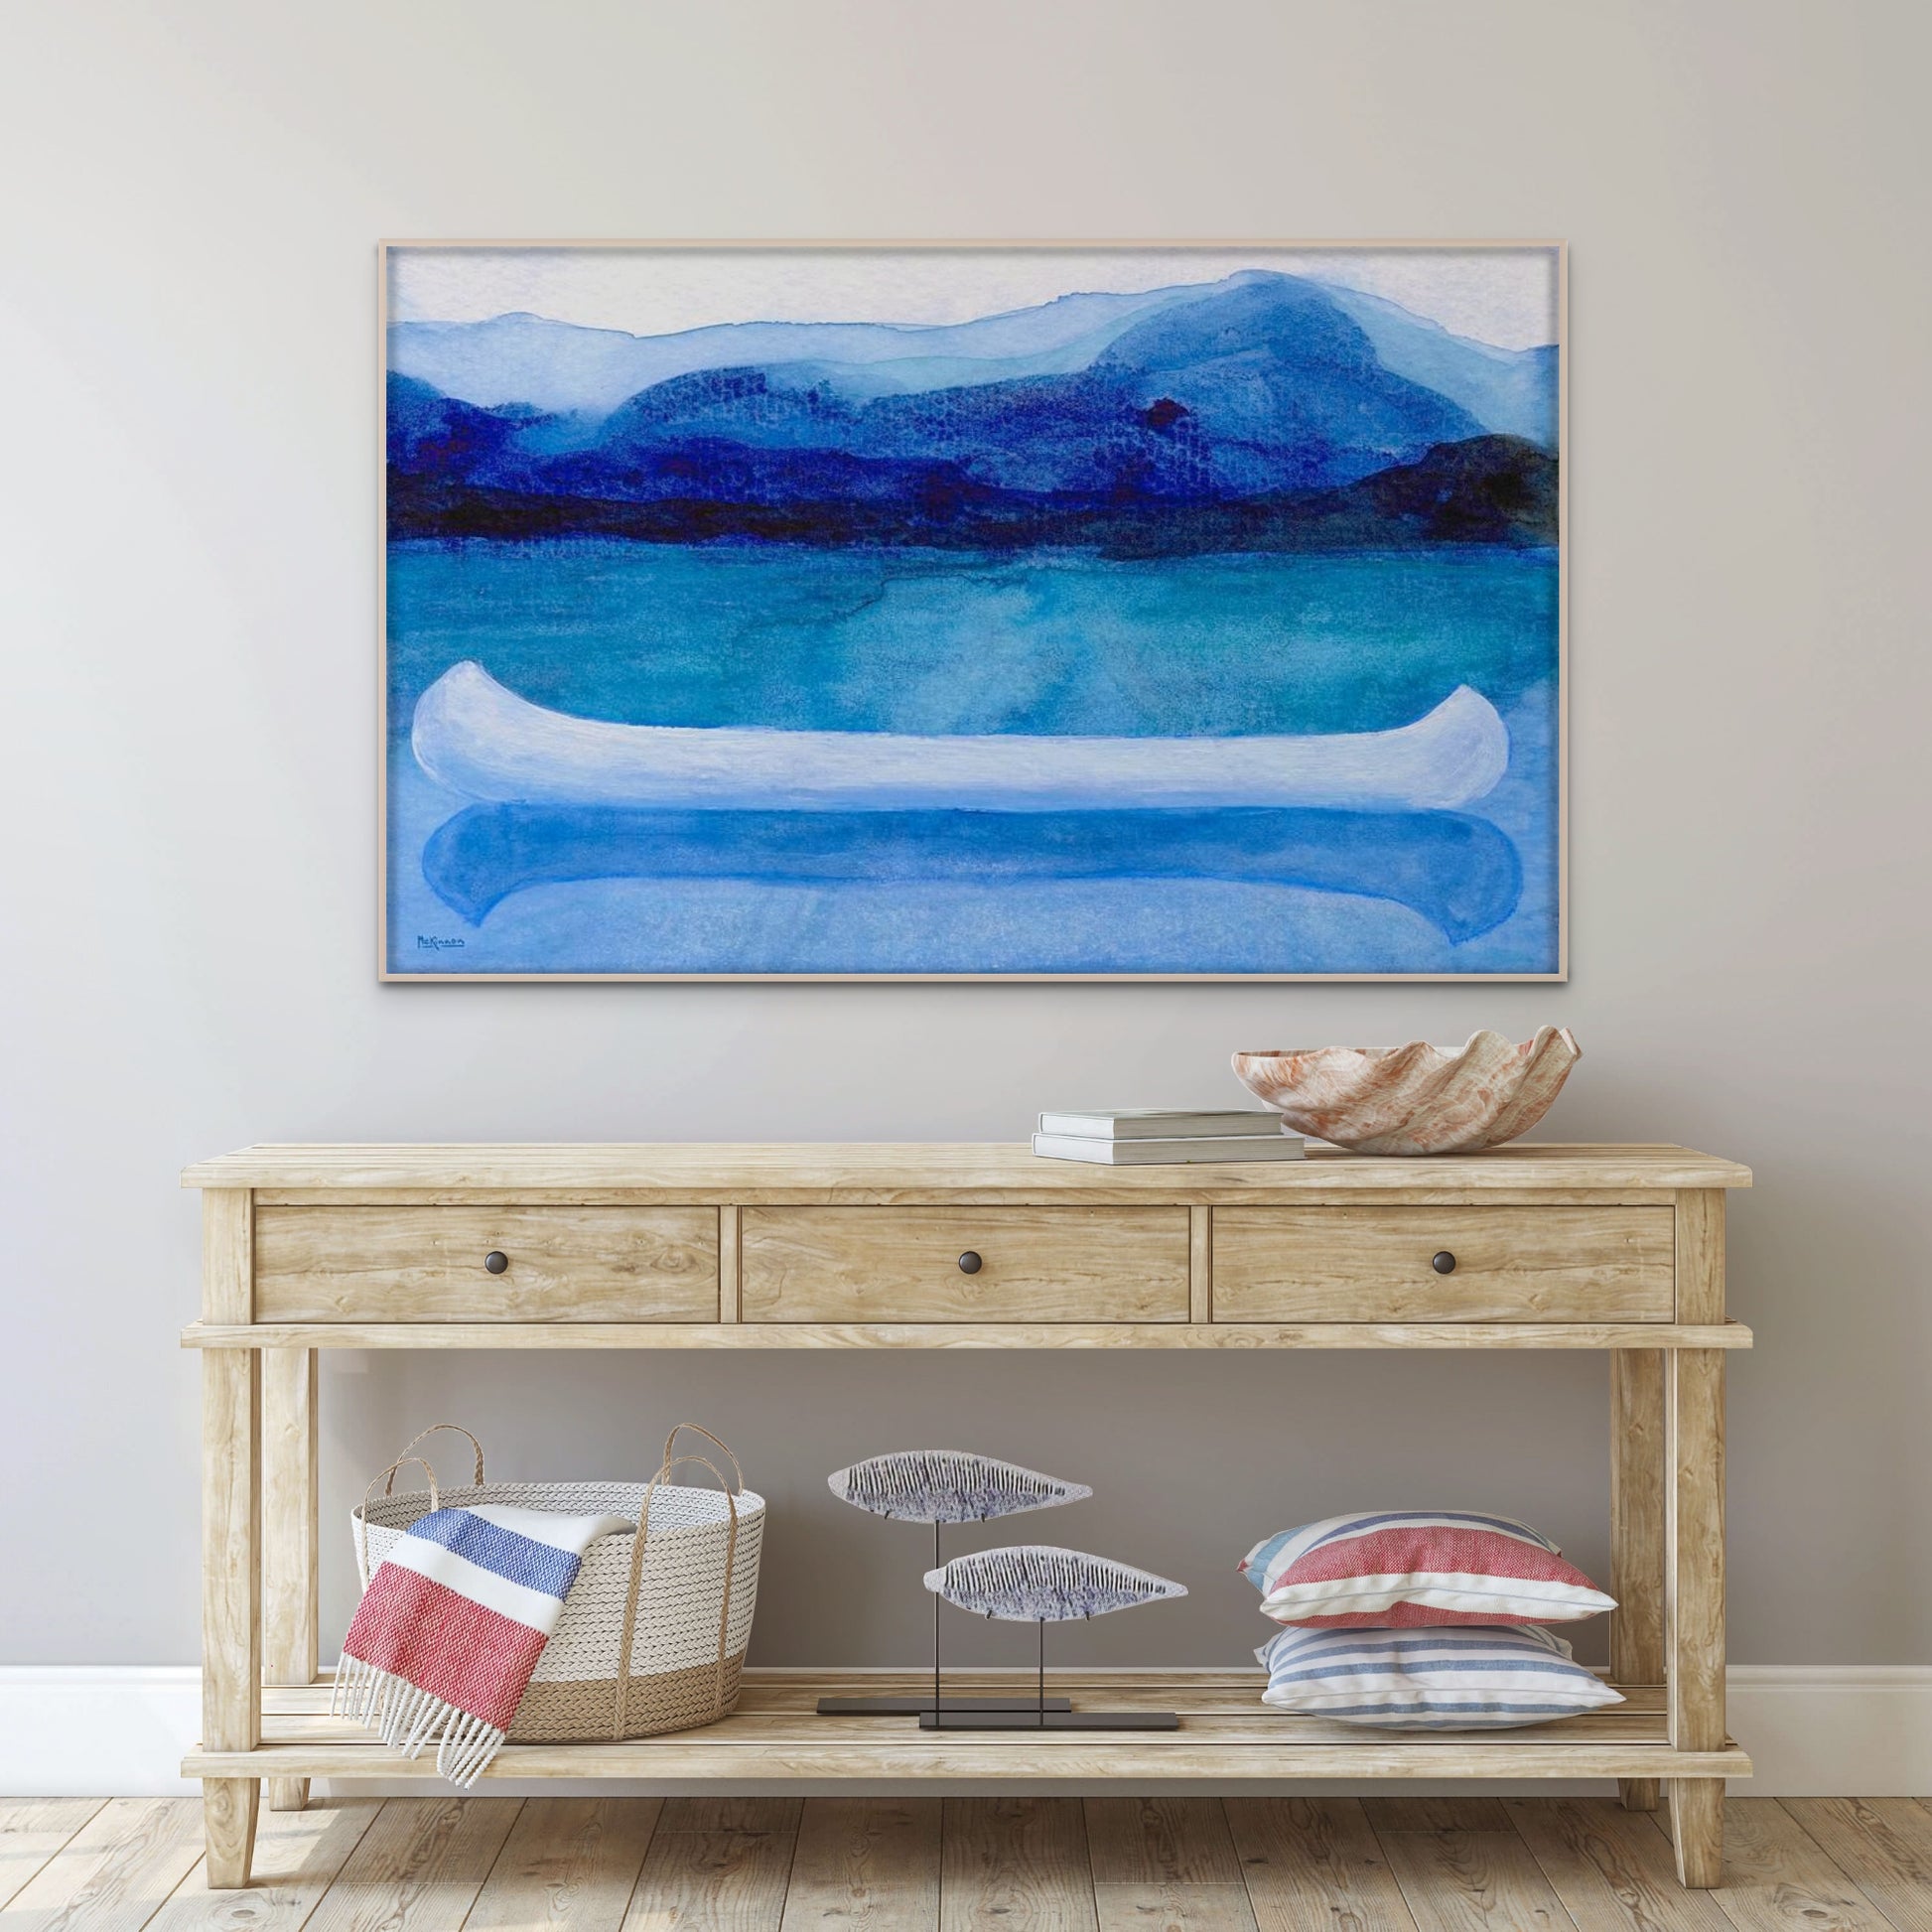 A work of canoeing art by Canadian artist Catherine McKinnon. The watercolor depicts a small white boat, a "canoe", on blue water with a dark blue distant shore and lighter blue distant moutains. The giclee print is framed in white and is mounted on a light gray wall above a beachy, light colored wood sideboard and beach house decor items.